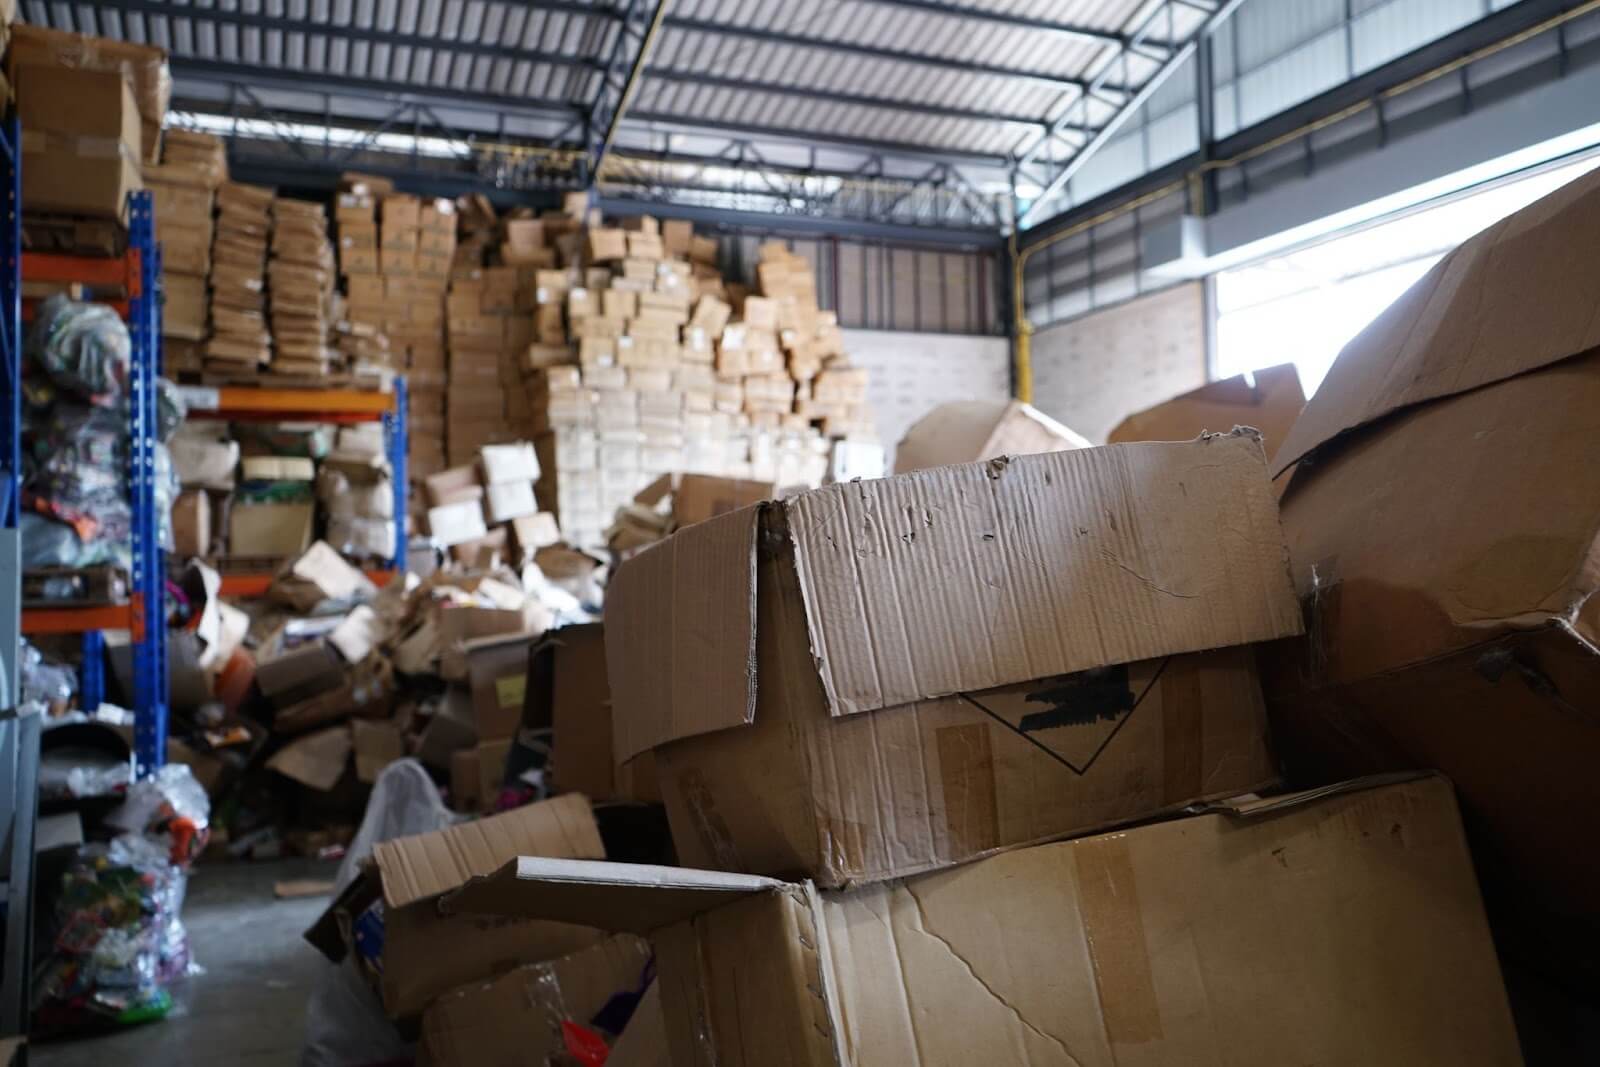 Messy warehouse with cardboard boxes stacked up in piles